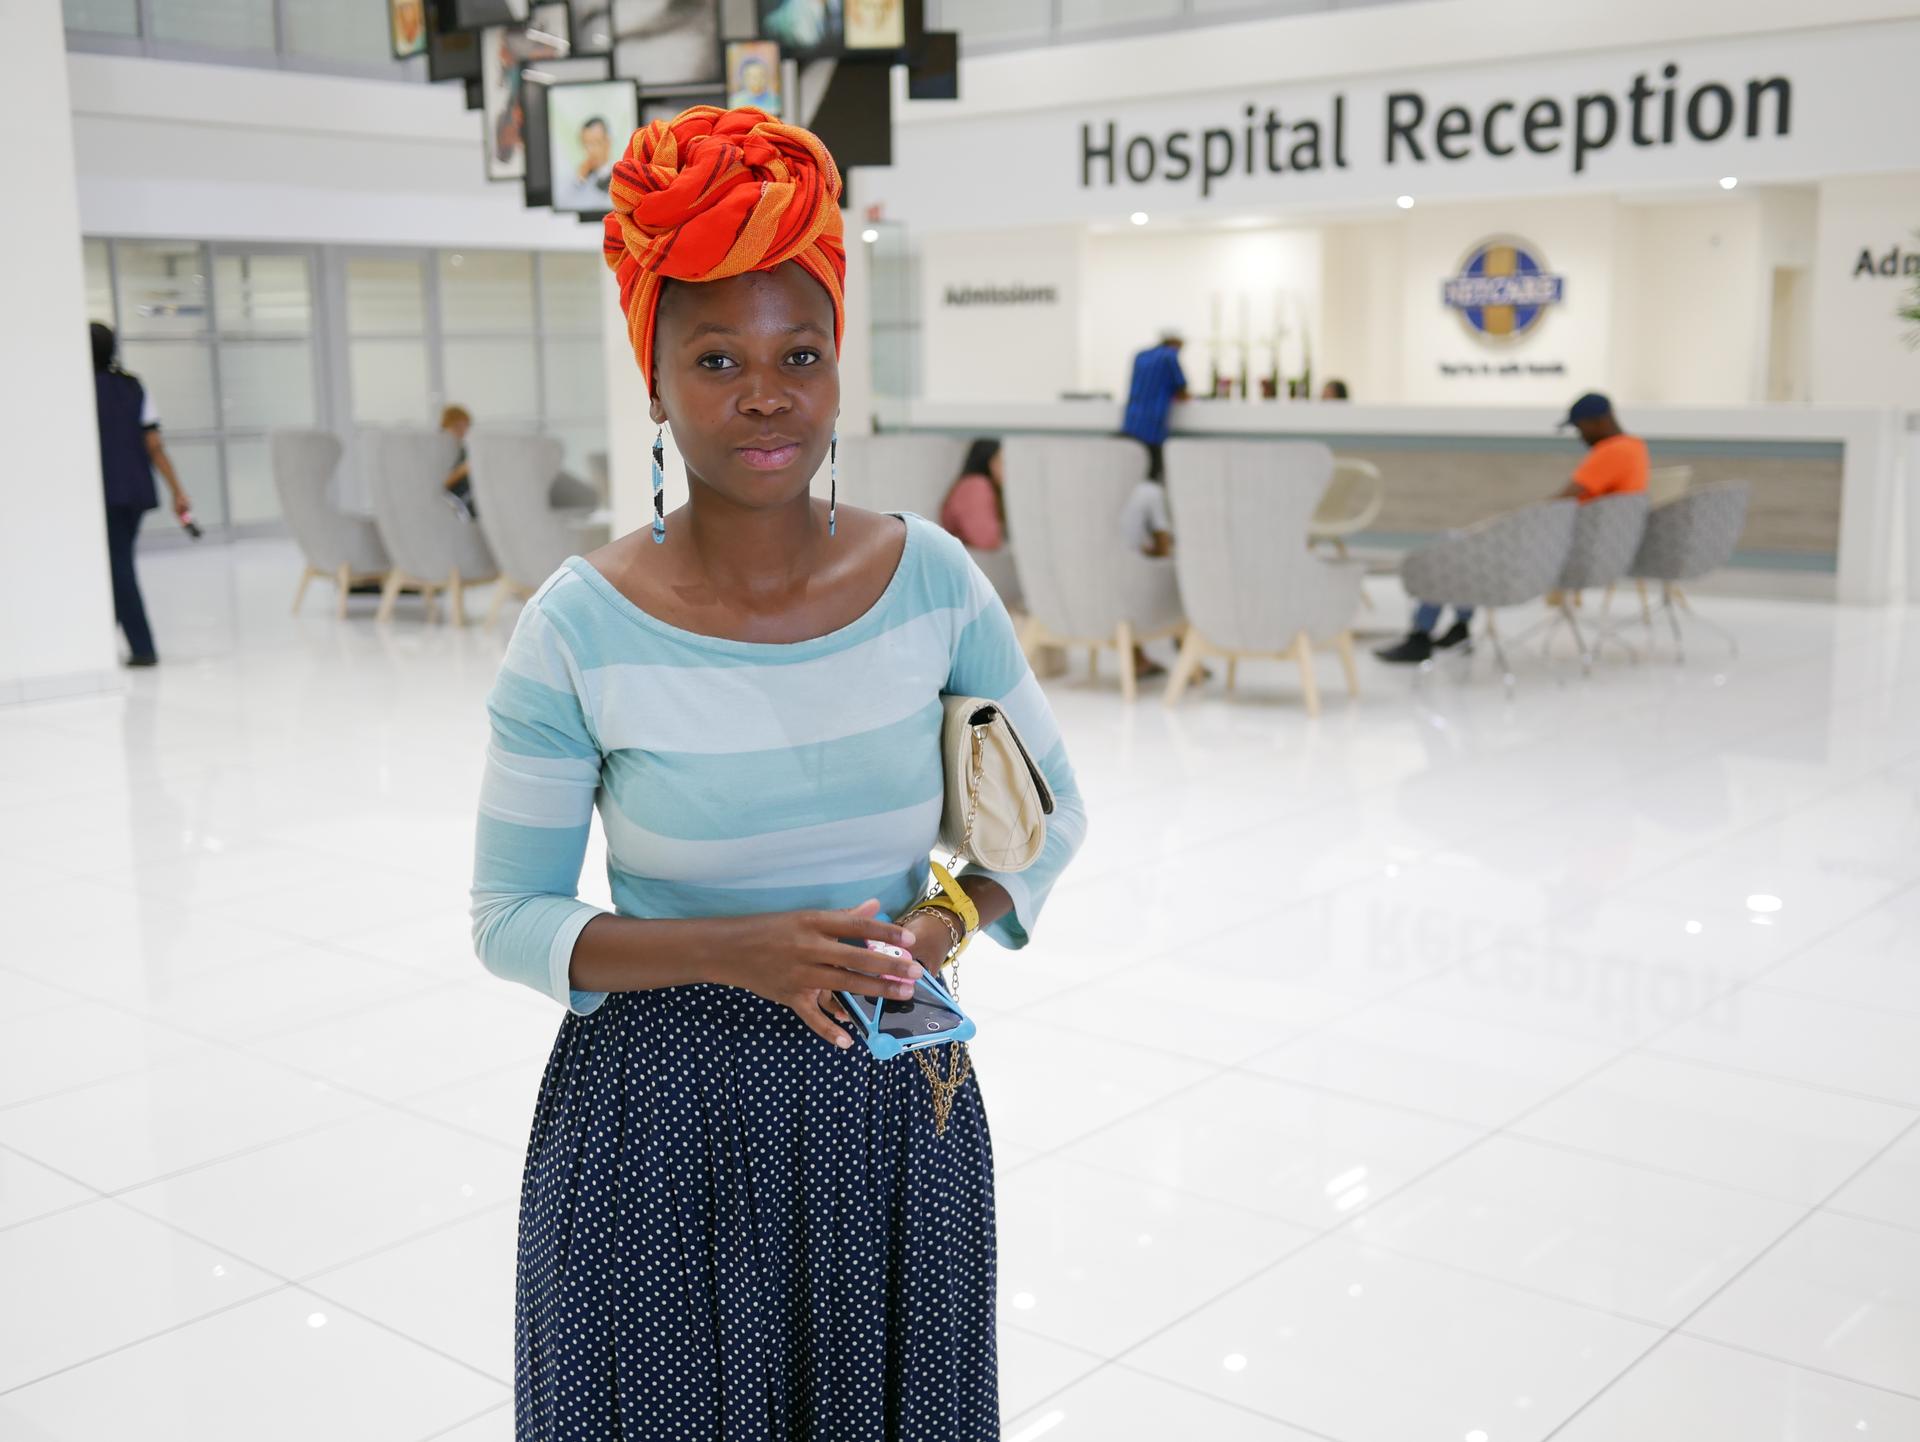 Somila Makangume, a Cape Town resident, in an orange head wrap and blue striped shirt, at Christiaan Barnard Hospital.